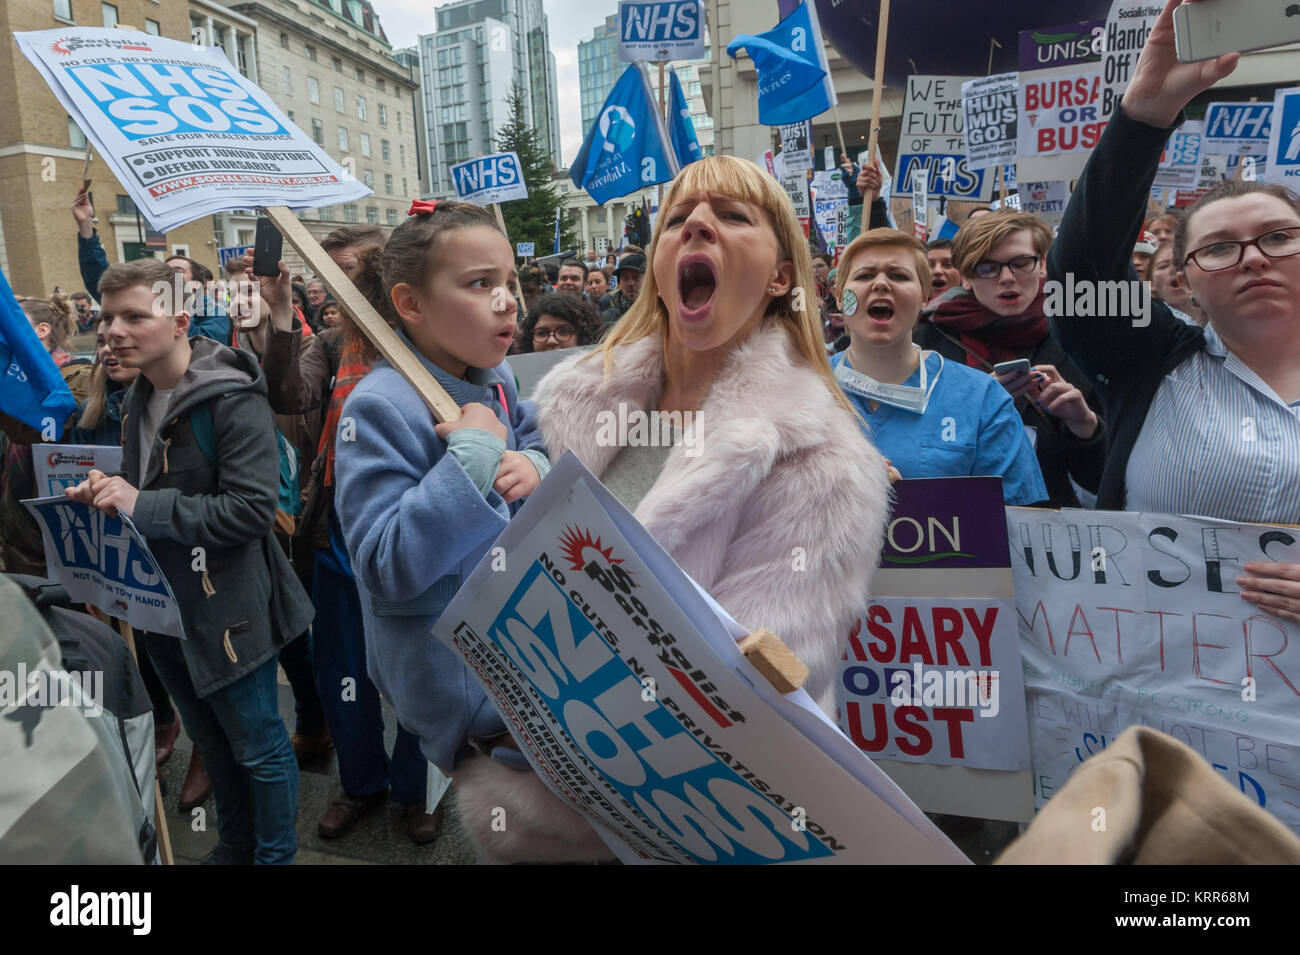 A woman holding a child is among those shouting support before the march to save NHS Student Bursaries. Stock Photo